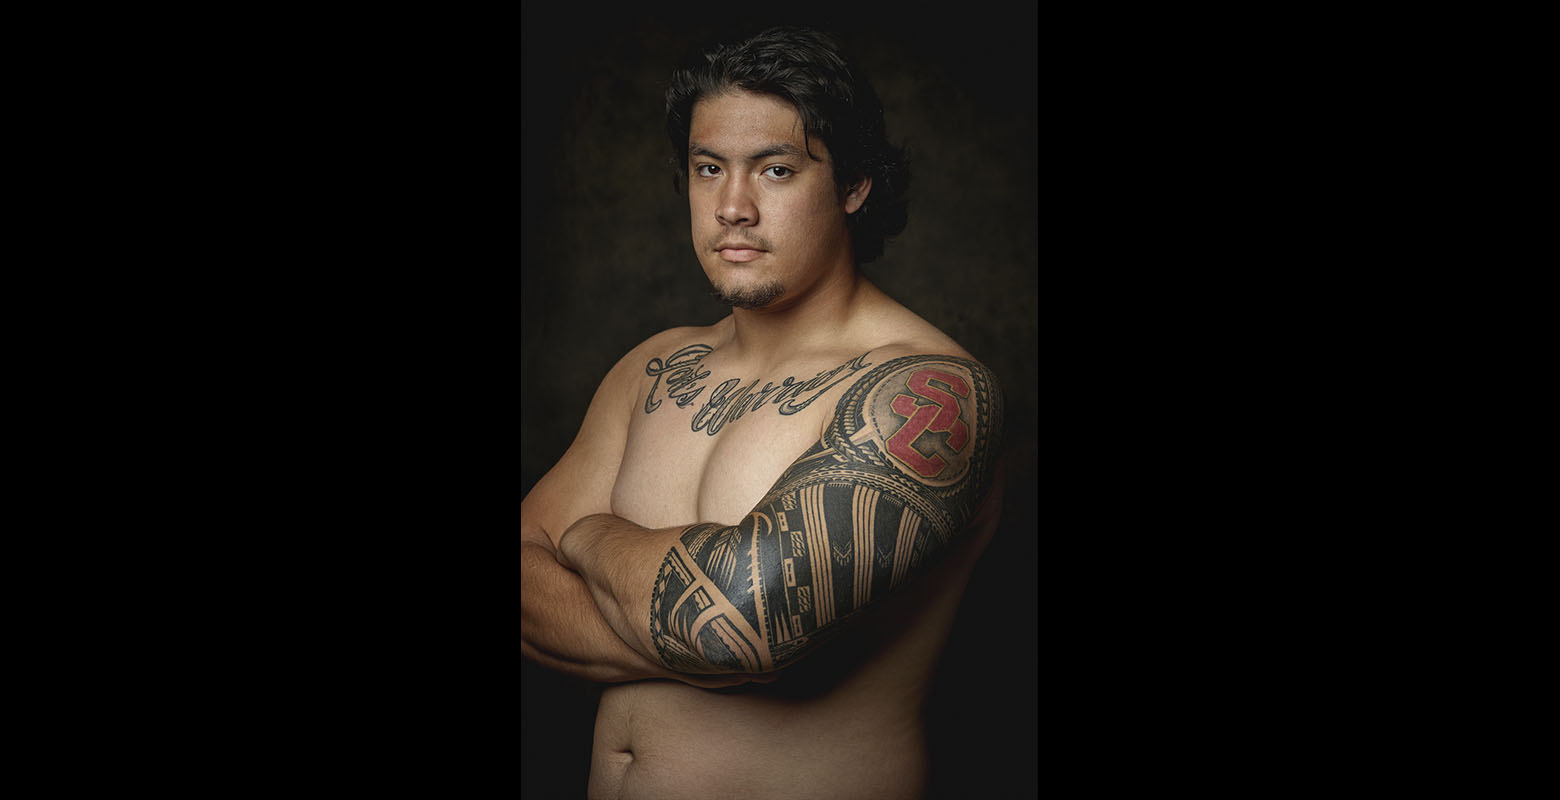 A man poses to show off his arm and chest tattoos